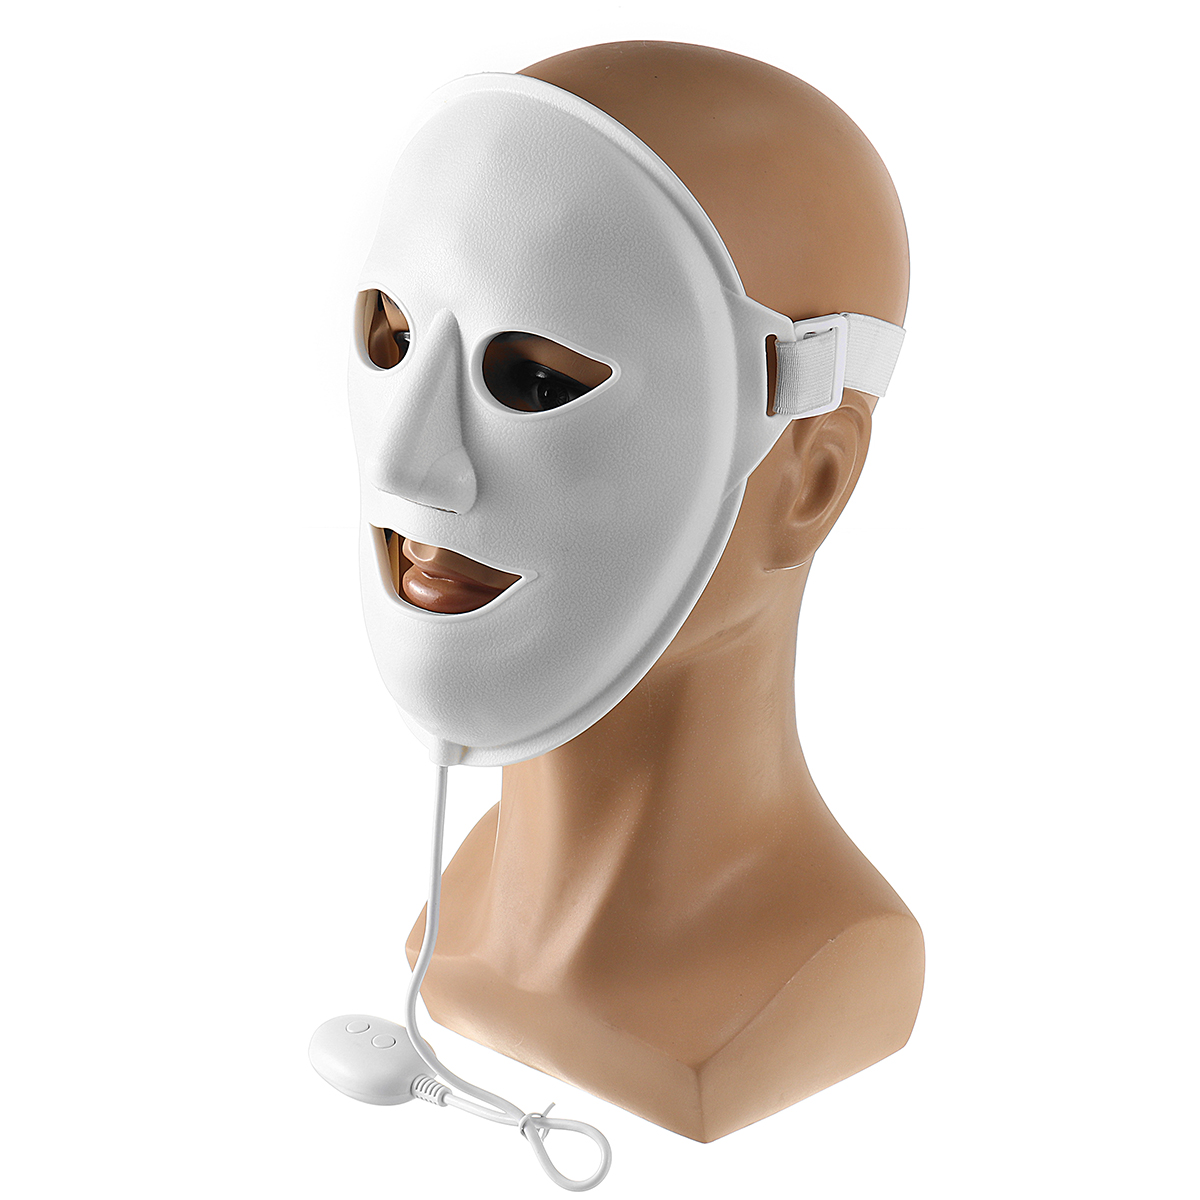 LED-Photon-Therapy-Facial-Mask-3-Colors-Vibration-Skin-Massager-Beauty-Face-Tool-1940393-9